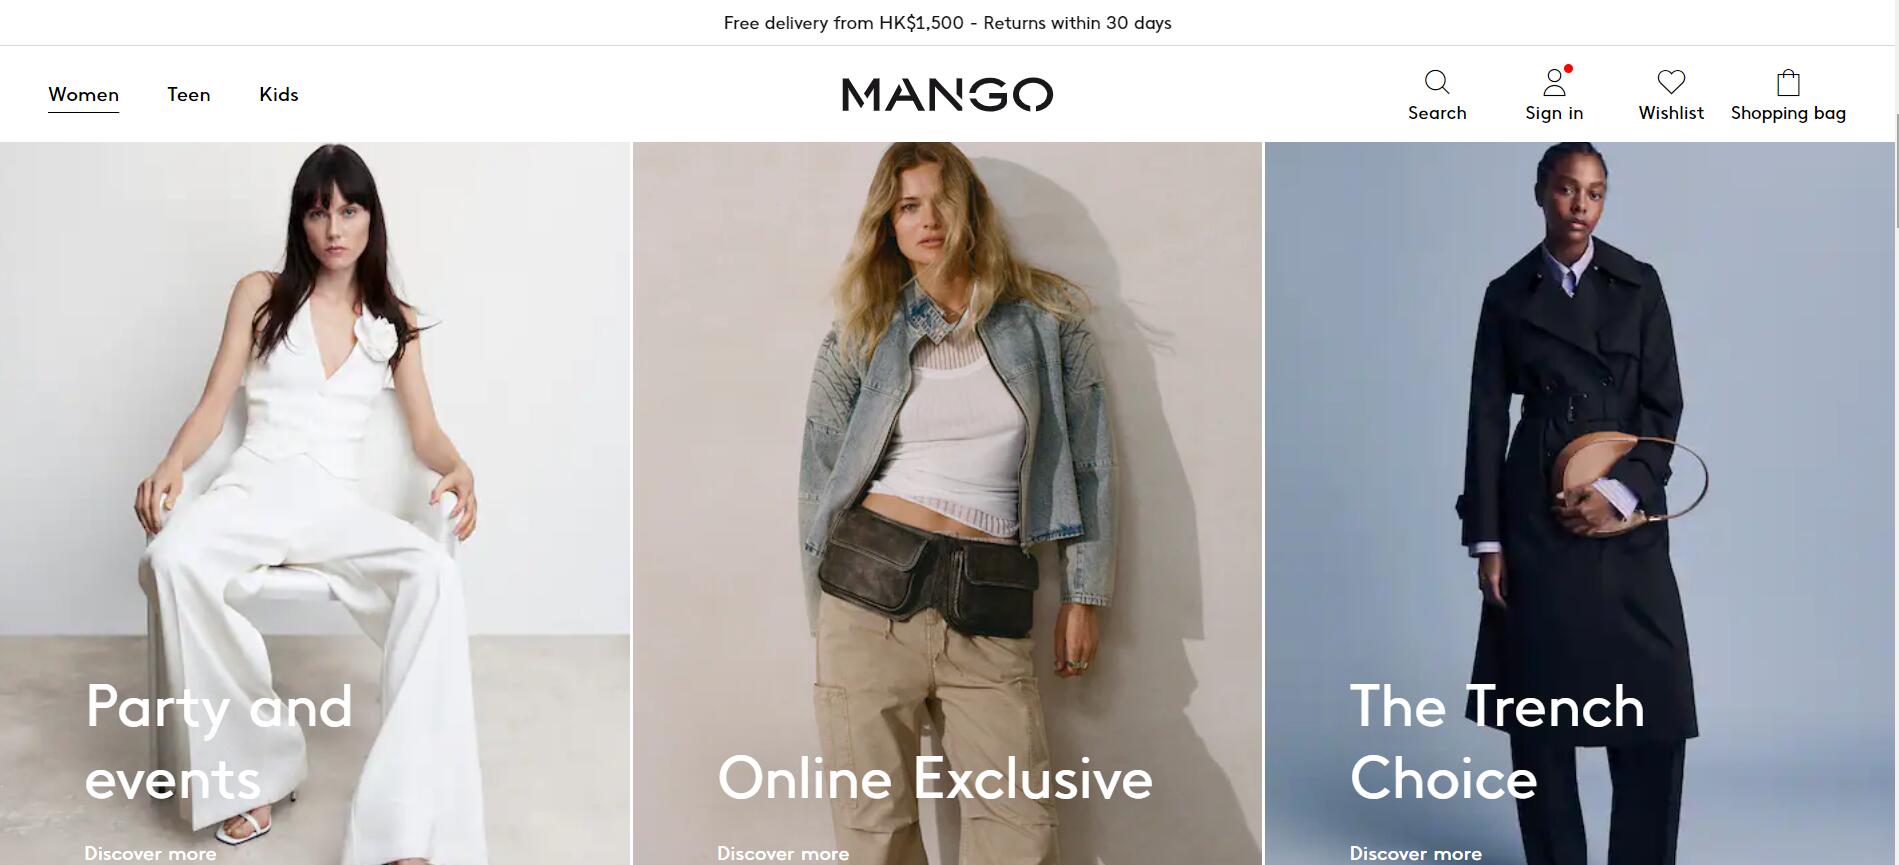 Mango’s FY2022 Net Result Rose 20.9% to a New High of €81 Million, Surpassing Pre-pandemic Levels